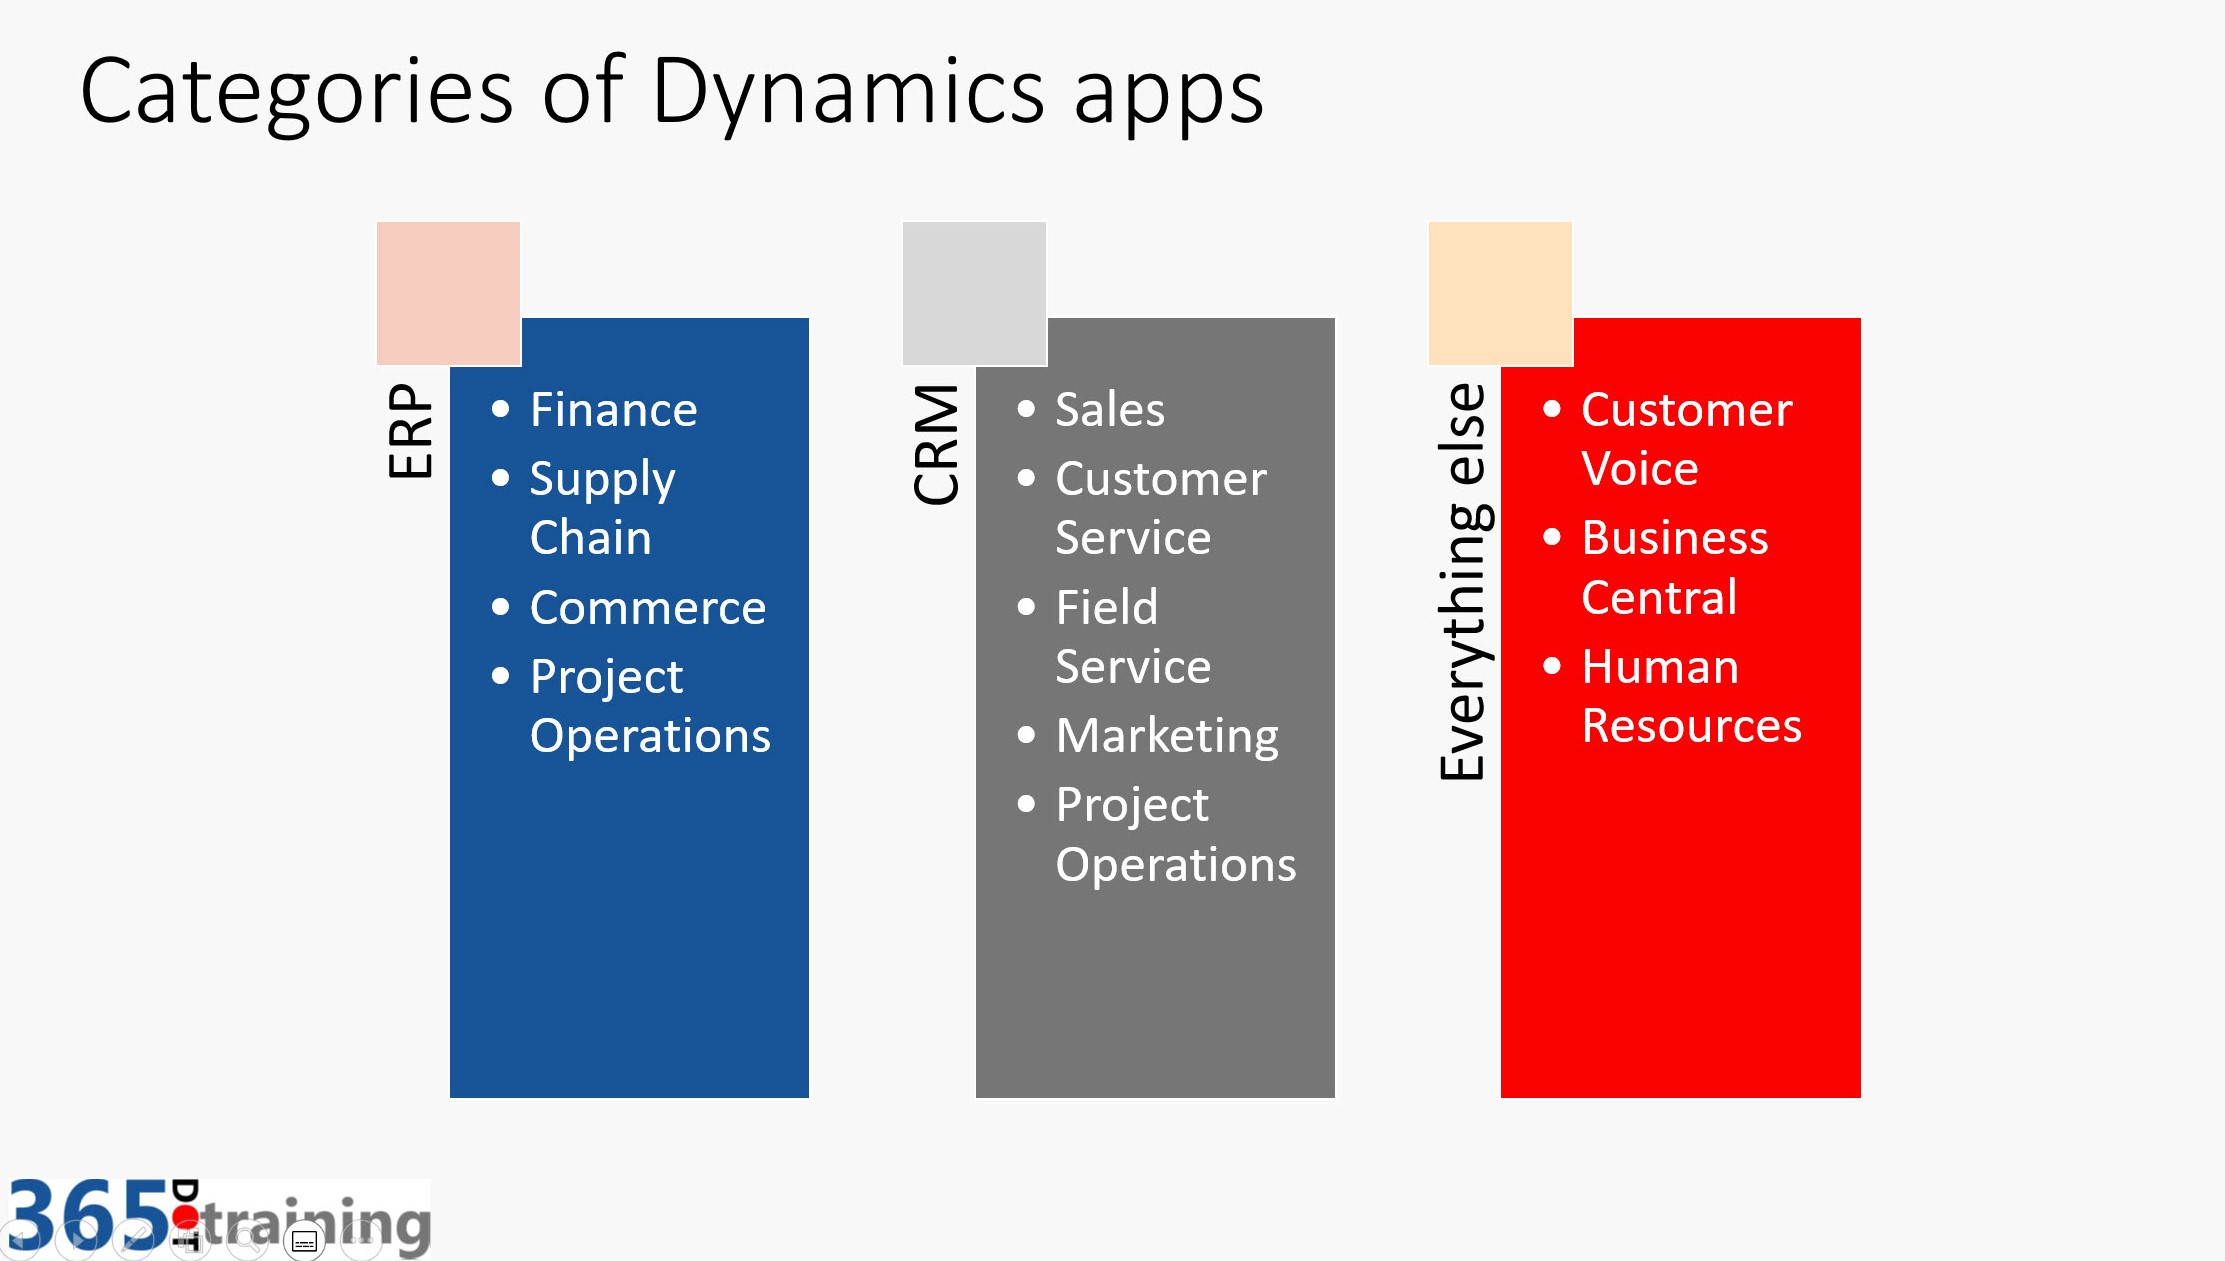 Intro to the Dynamics Apps cover image